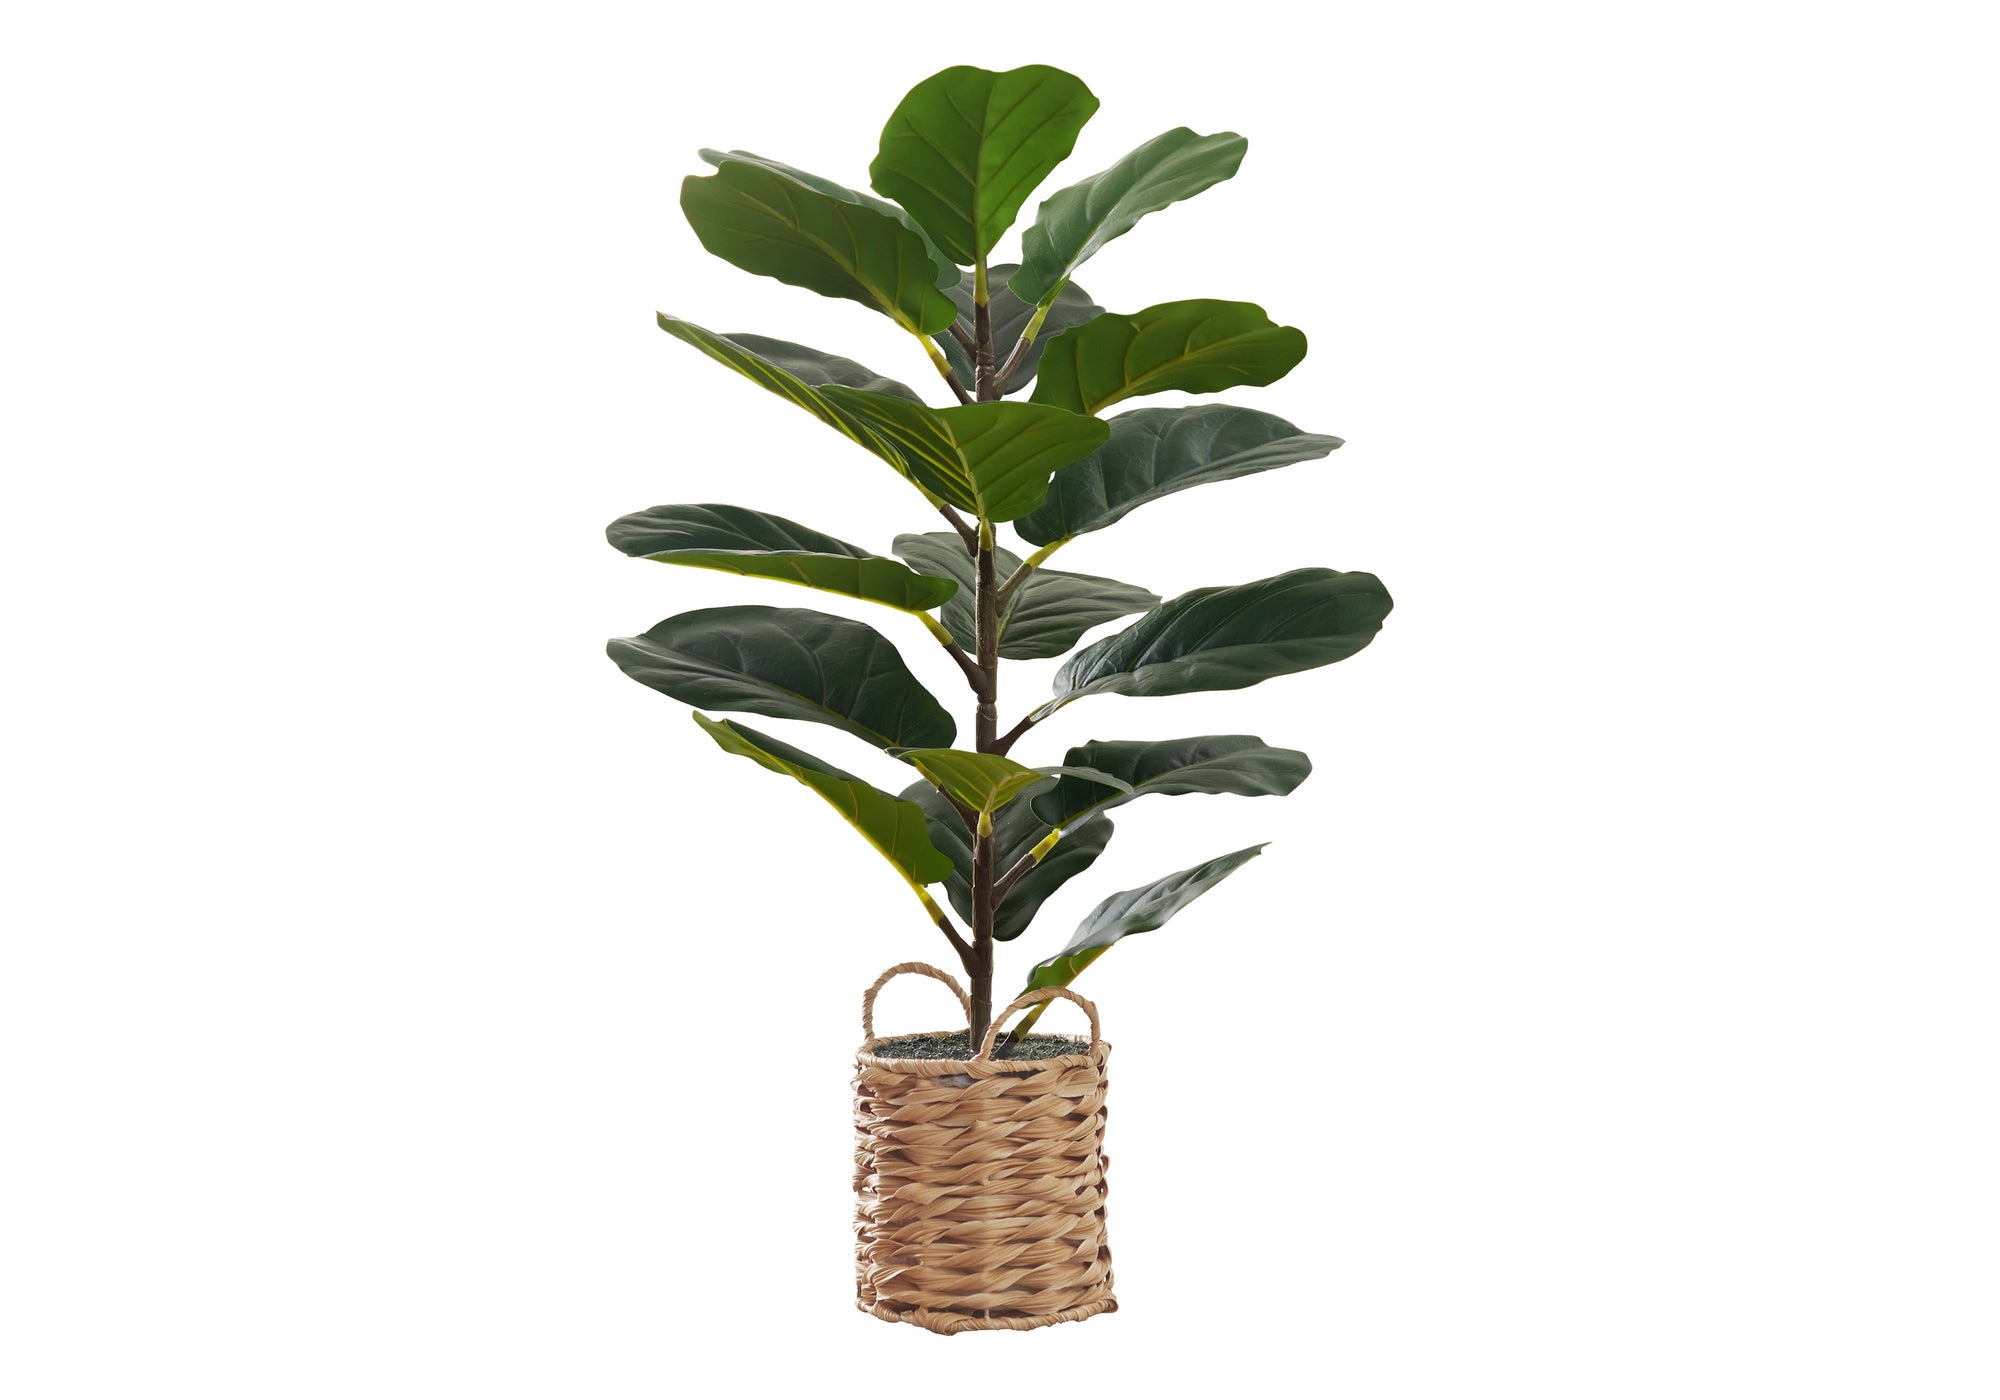 MN-269505    Artificial Plant, 28" Tall, Fiddle Tree, Indoor, Faux, Fake, Floor, Greenery, Potted, Real Touch, Decorative, Green Leaves, Beige Woven Basket